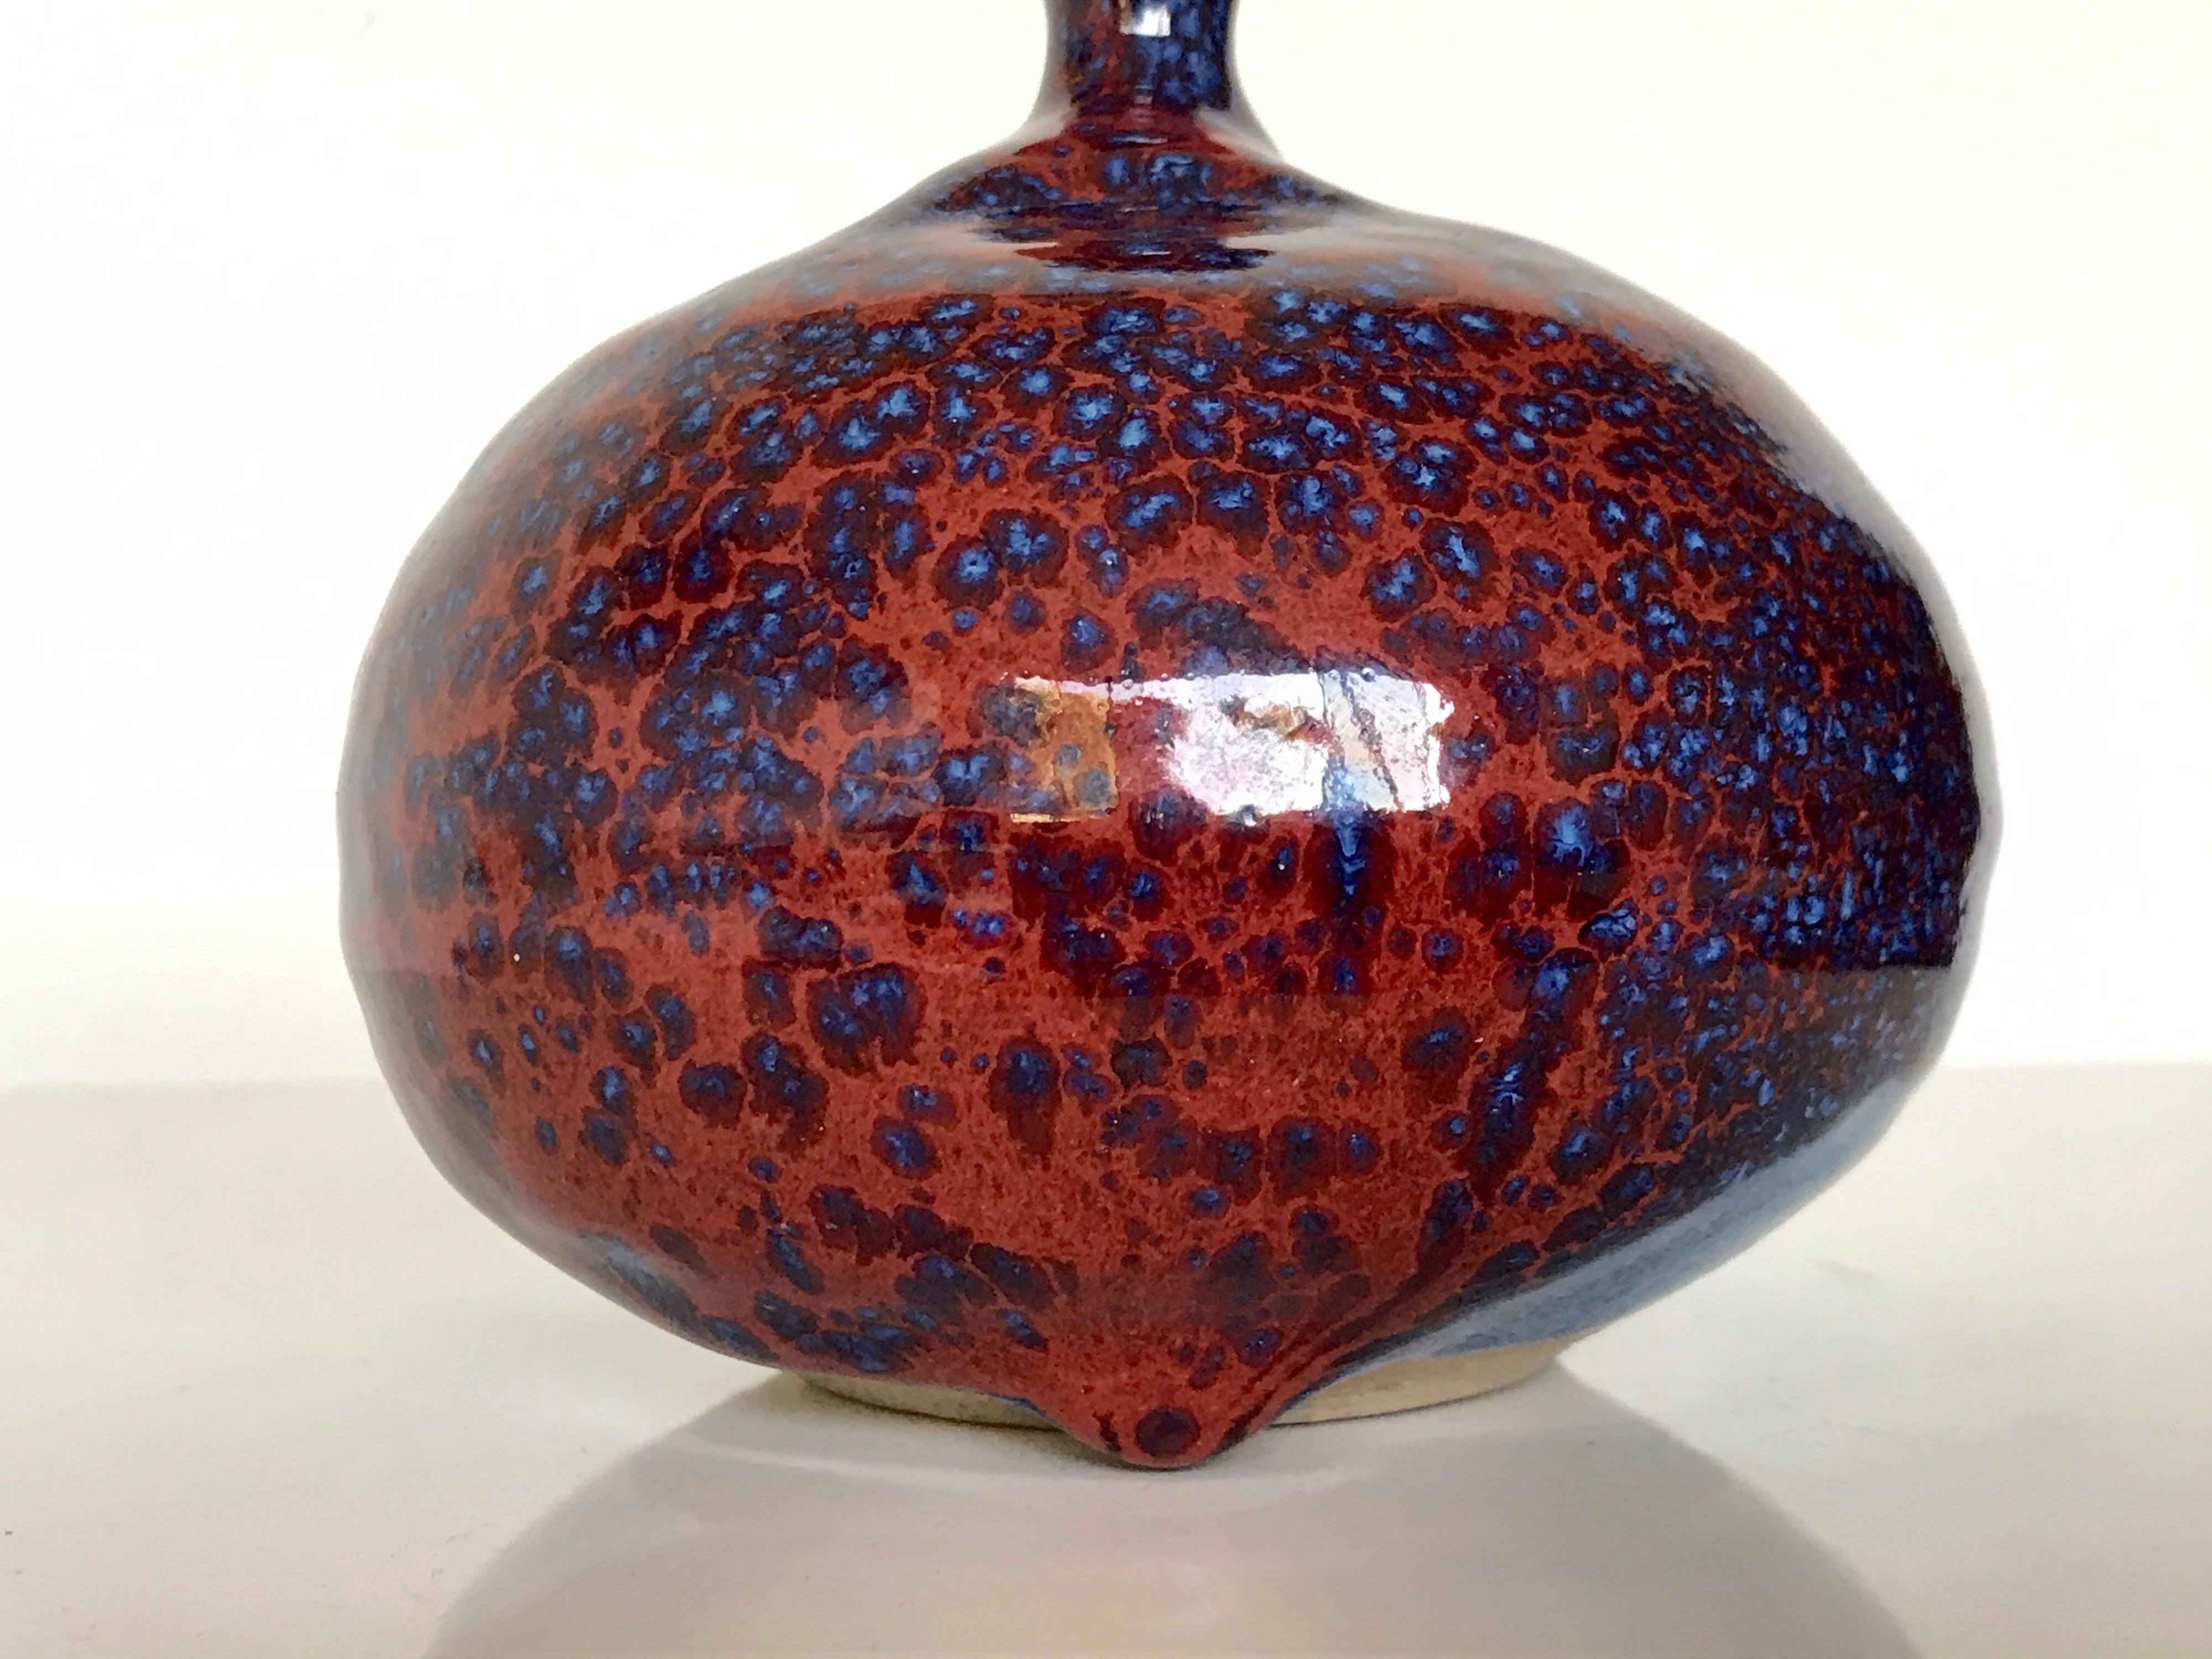 Glazed Susan Harnly Peterson Studio Pottery Weed Vase